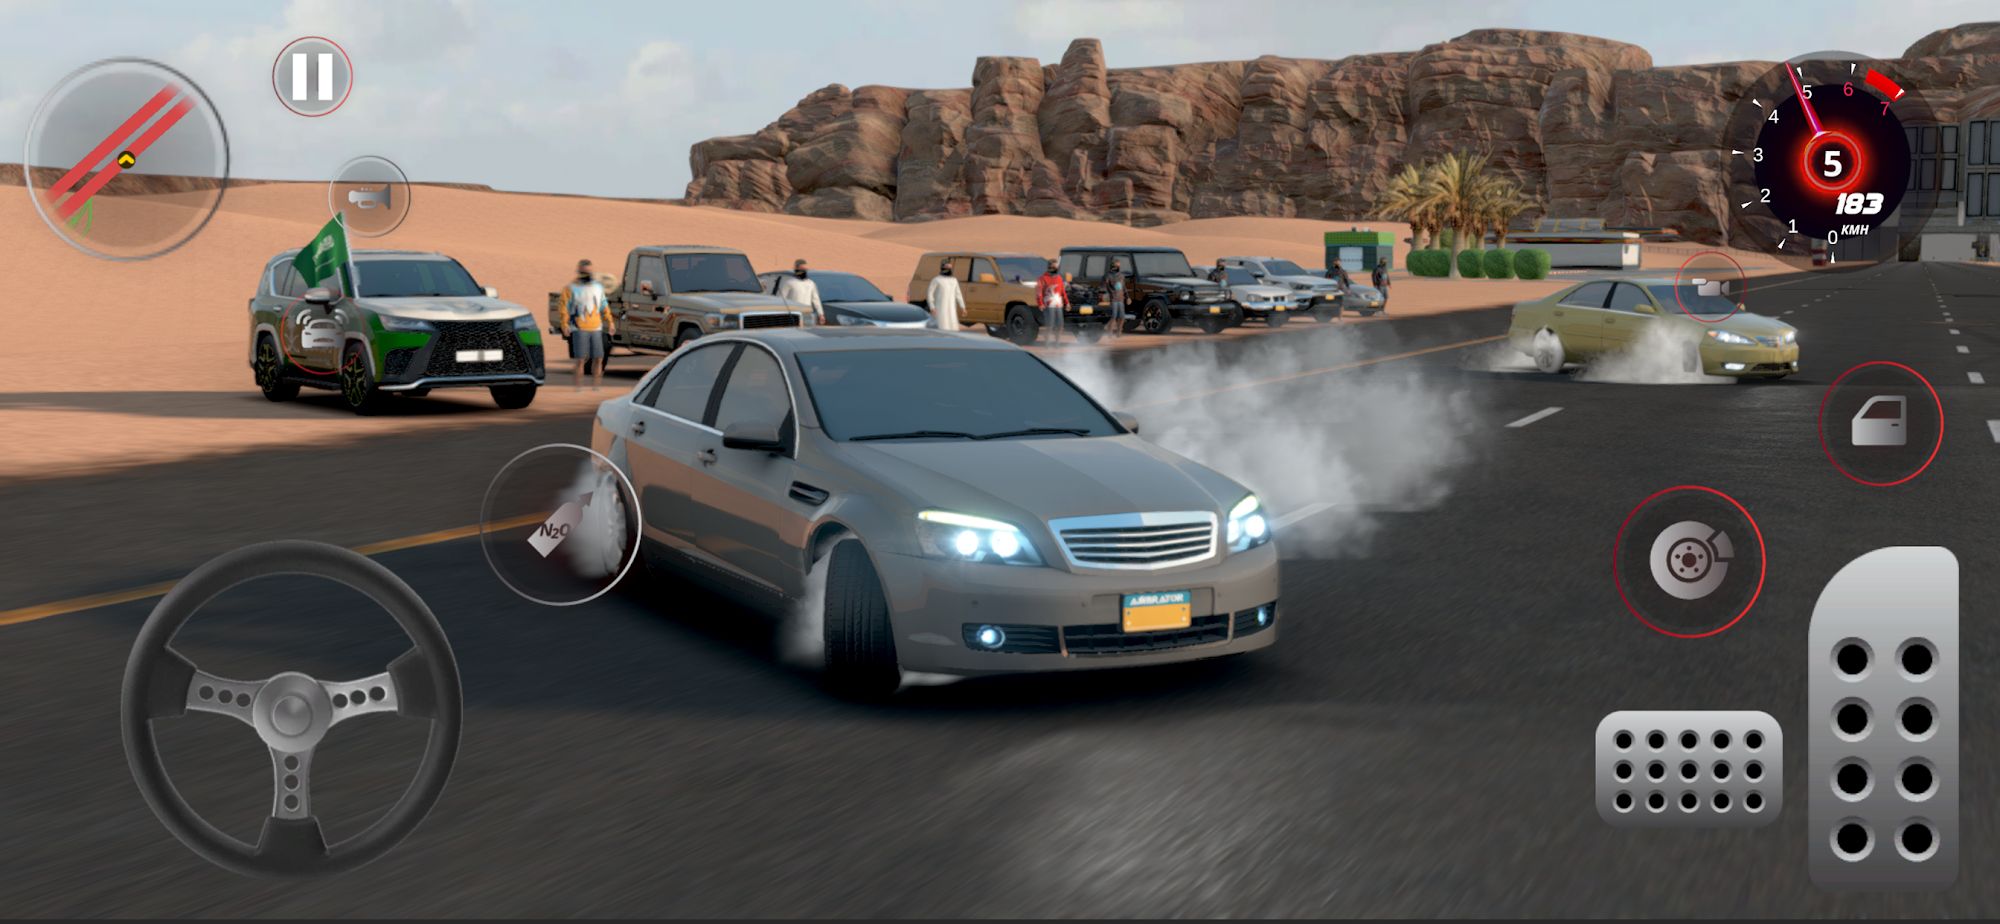 Scarica Drift for Life gratis per Android.